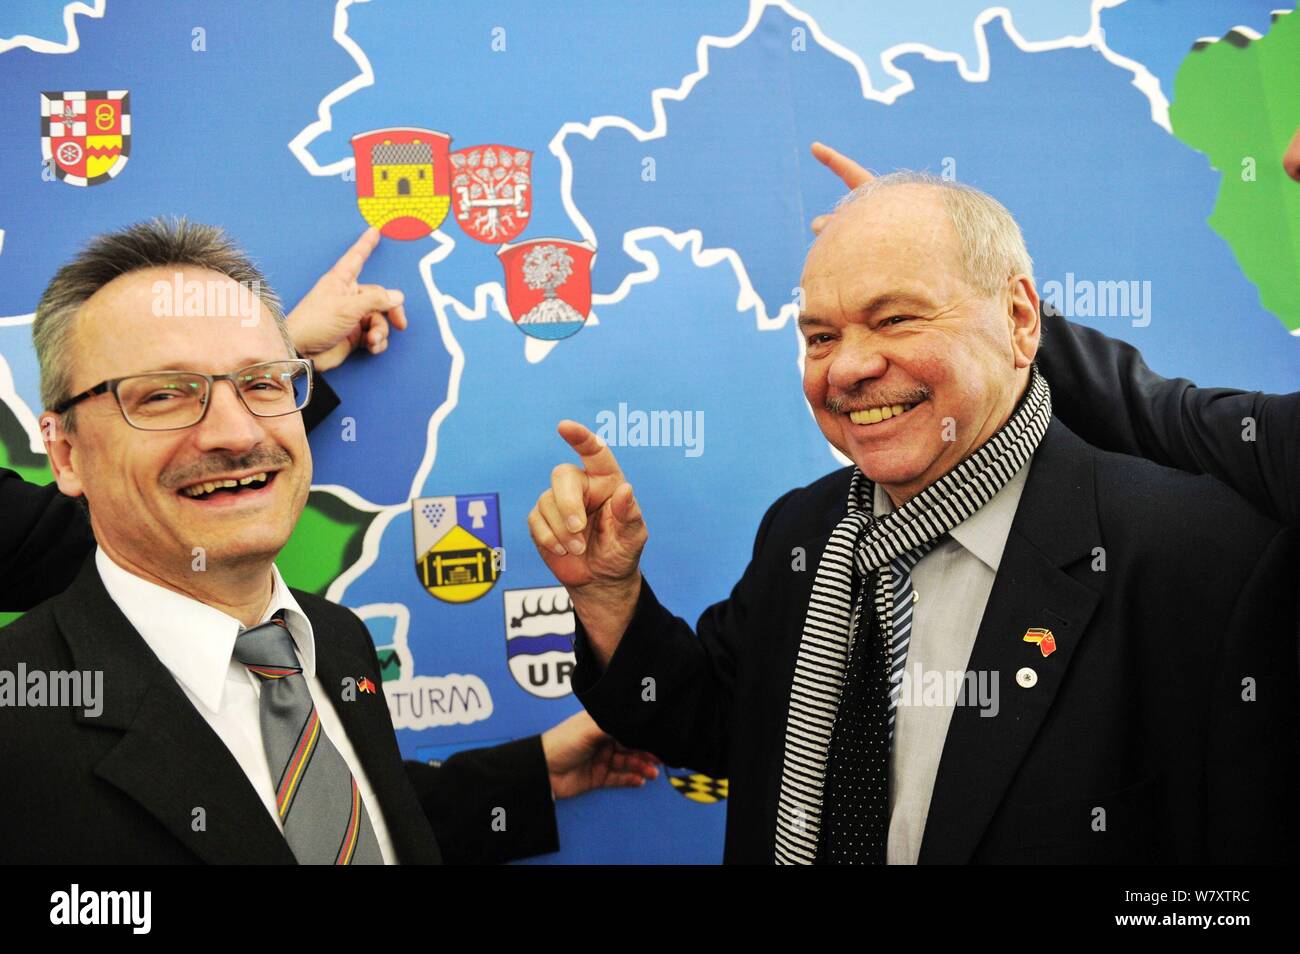 German football manager Klaus Schlappner, right, poses with a German city mayor during a symposium at the Sino-German Ecopark in Qingdao city, east Ch Stock Photo